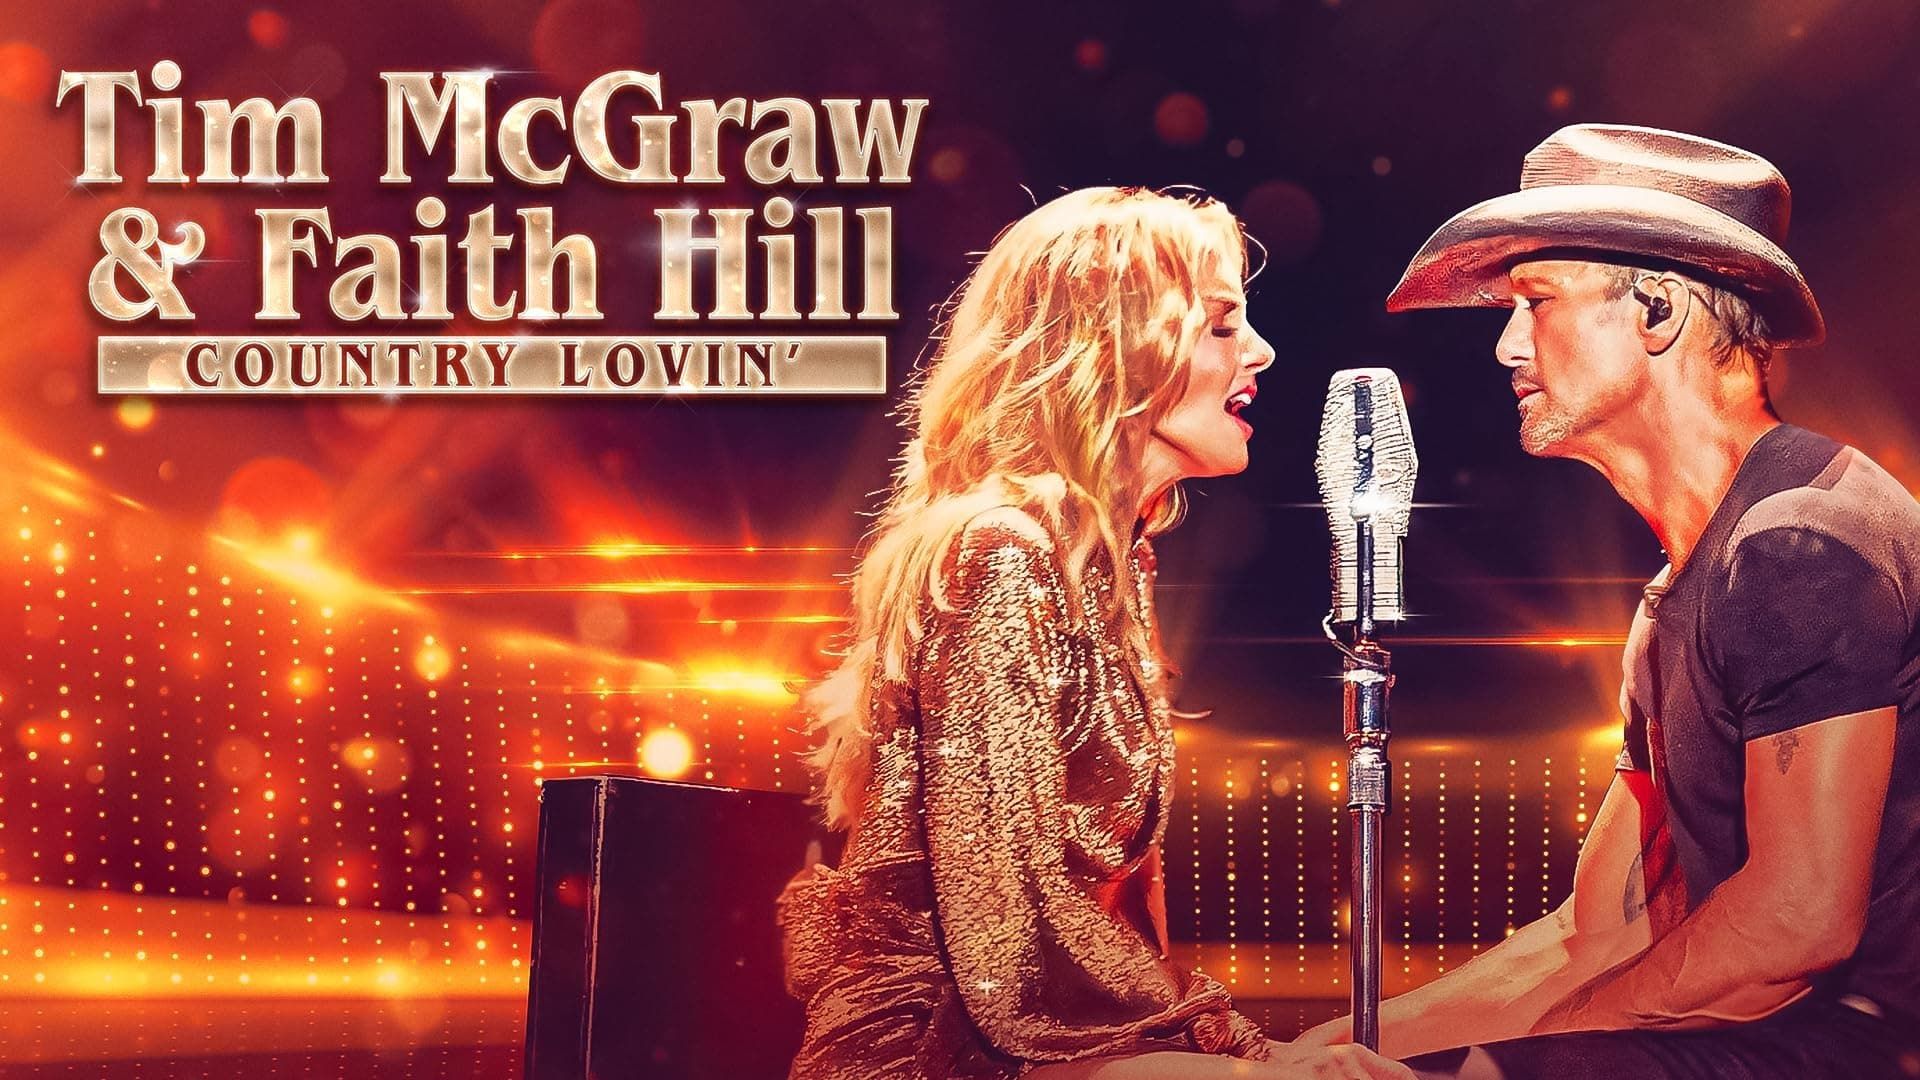 Tim McGraw and Faith Hill: Country Lovin' background